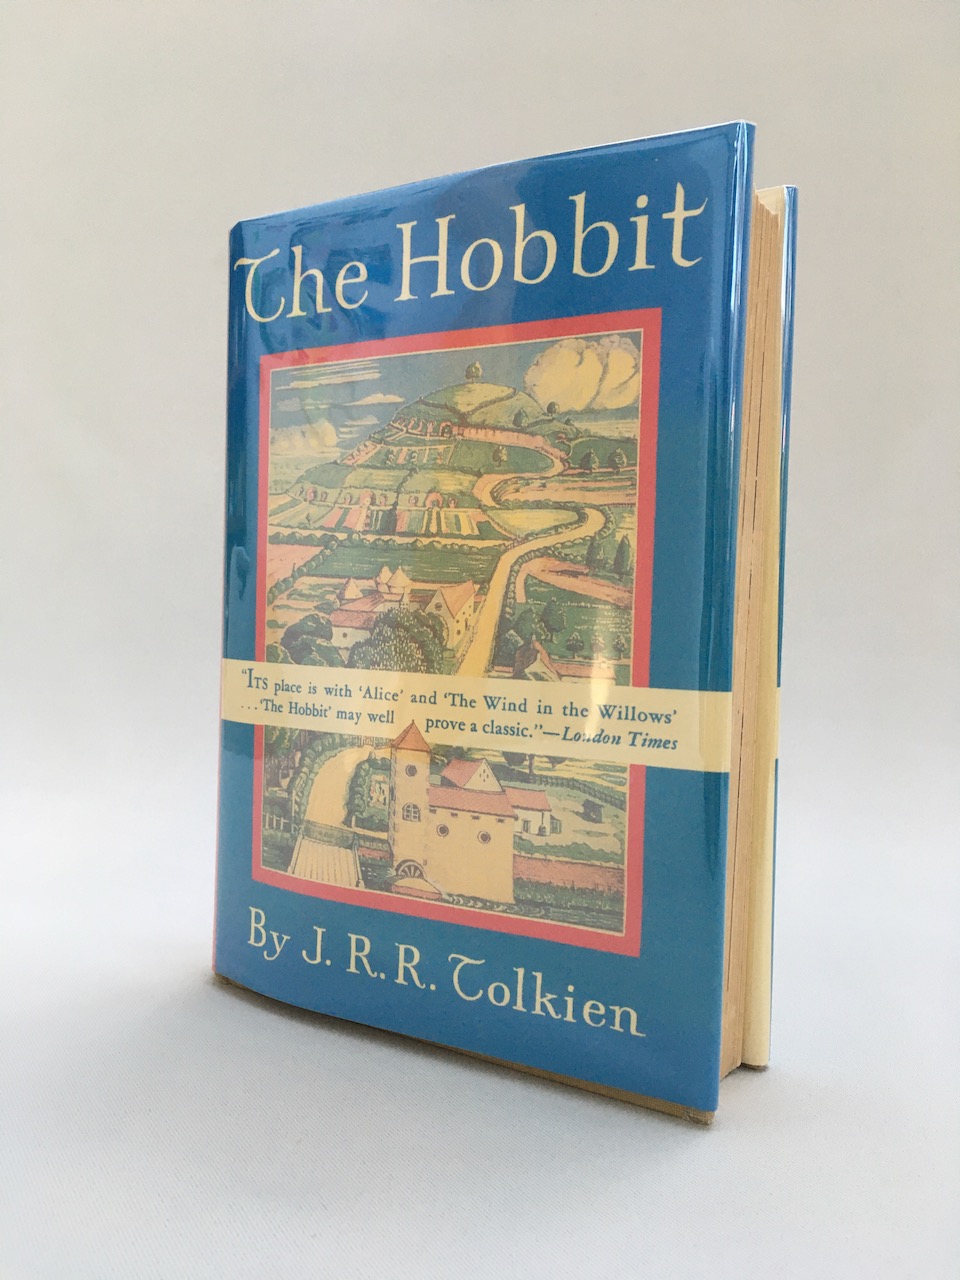 The Hobbit by J.R.R. Tolkien US 1st Edition, 1st Impression, 1st State, with the bowing Hobbit on the title page